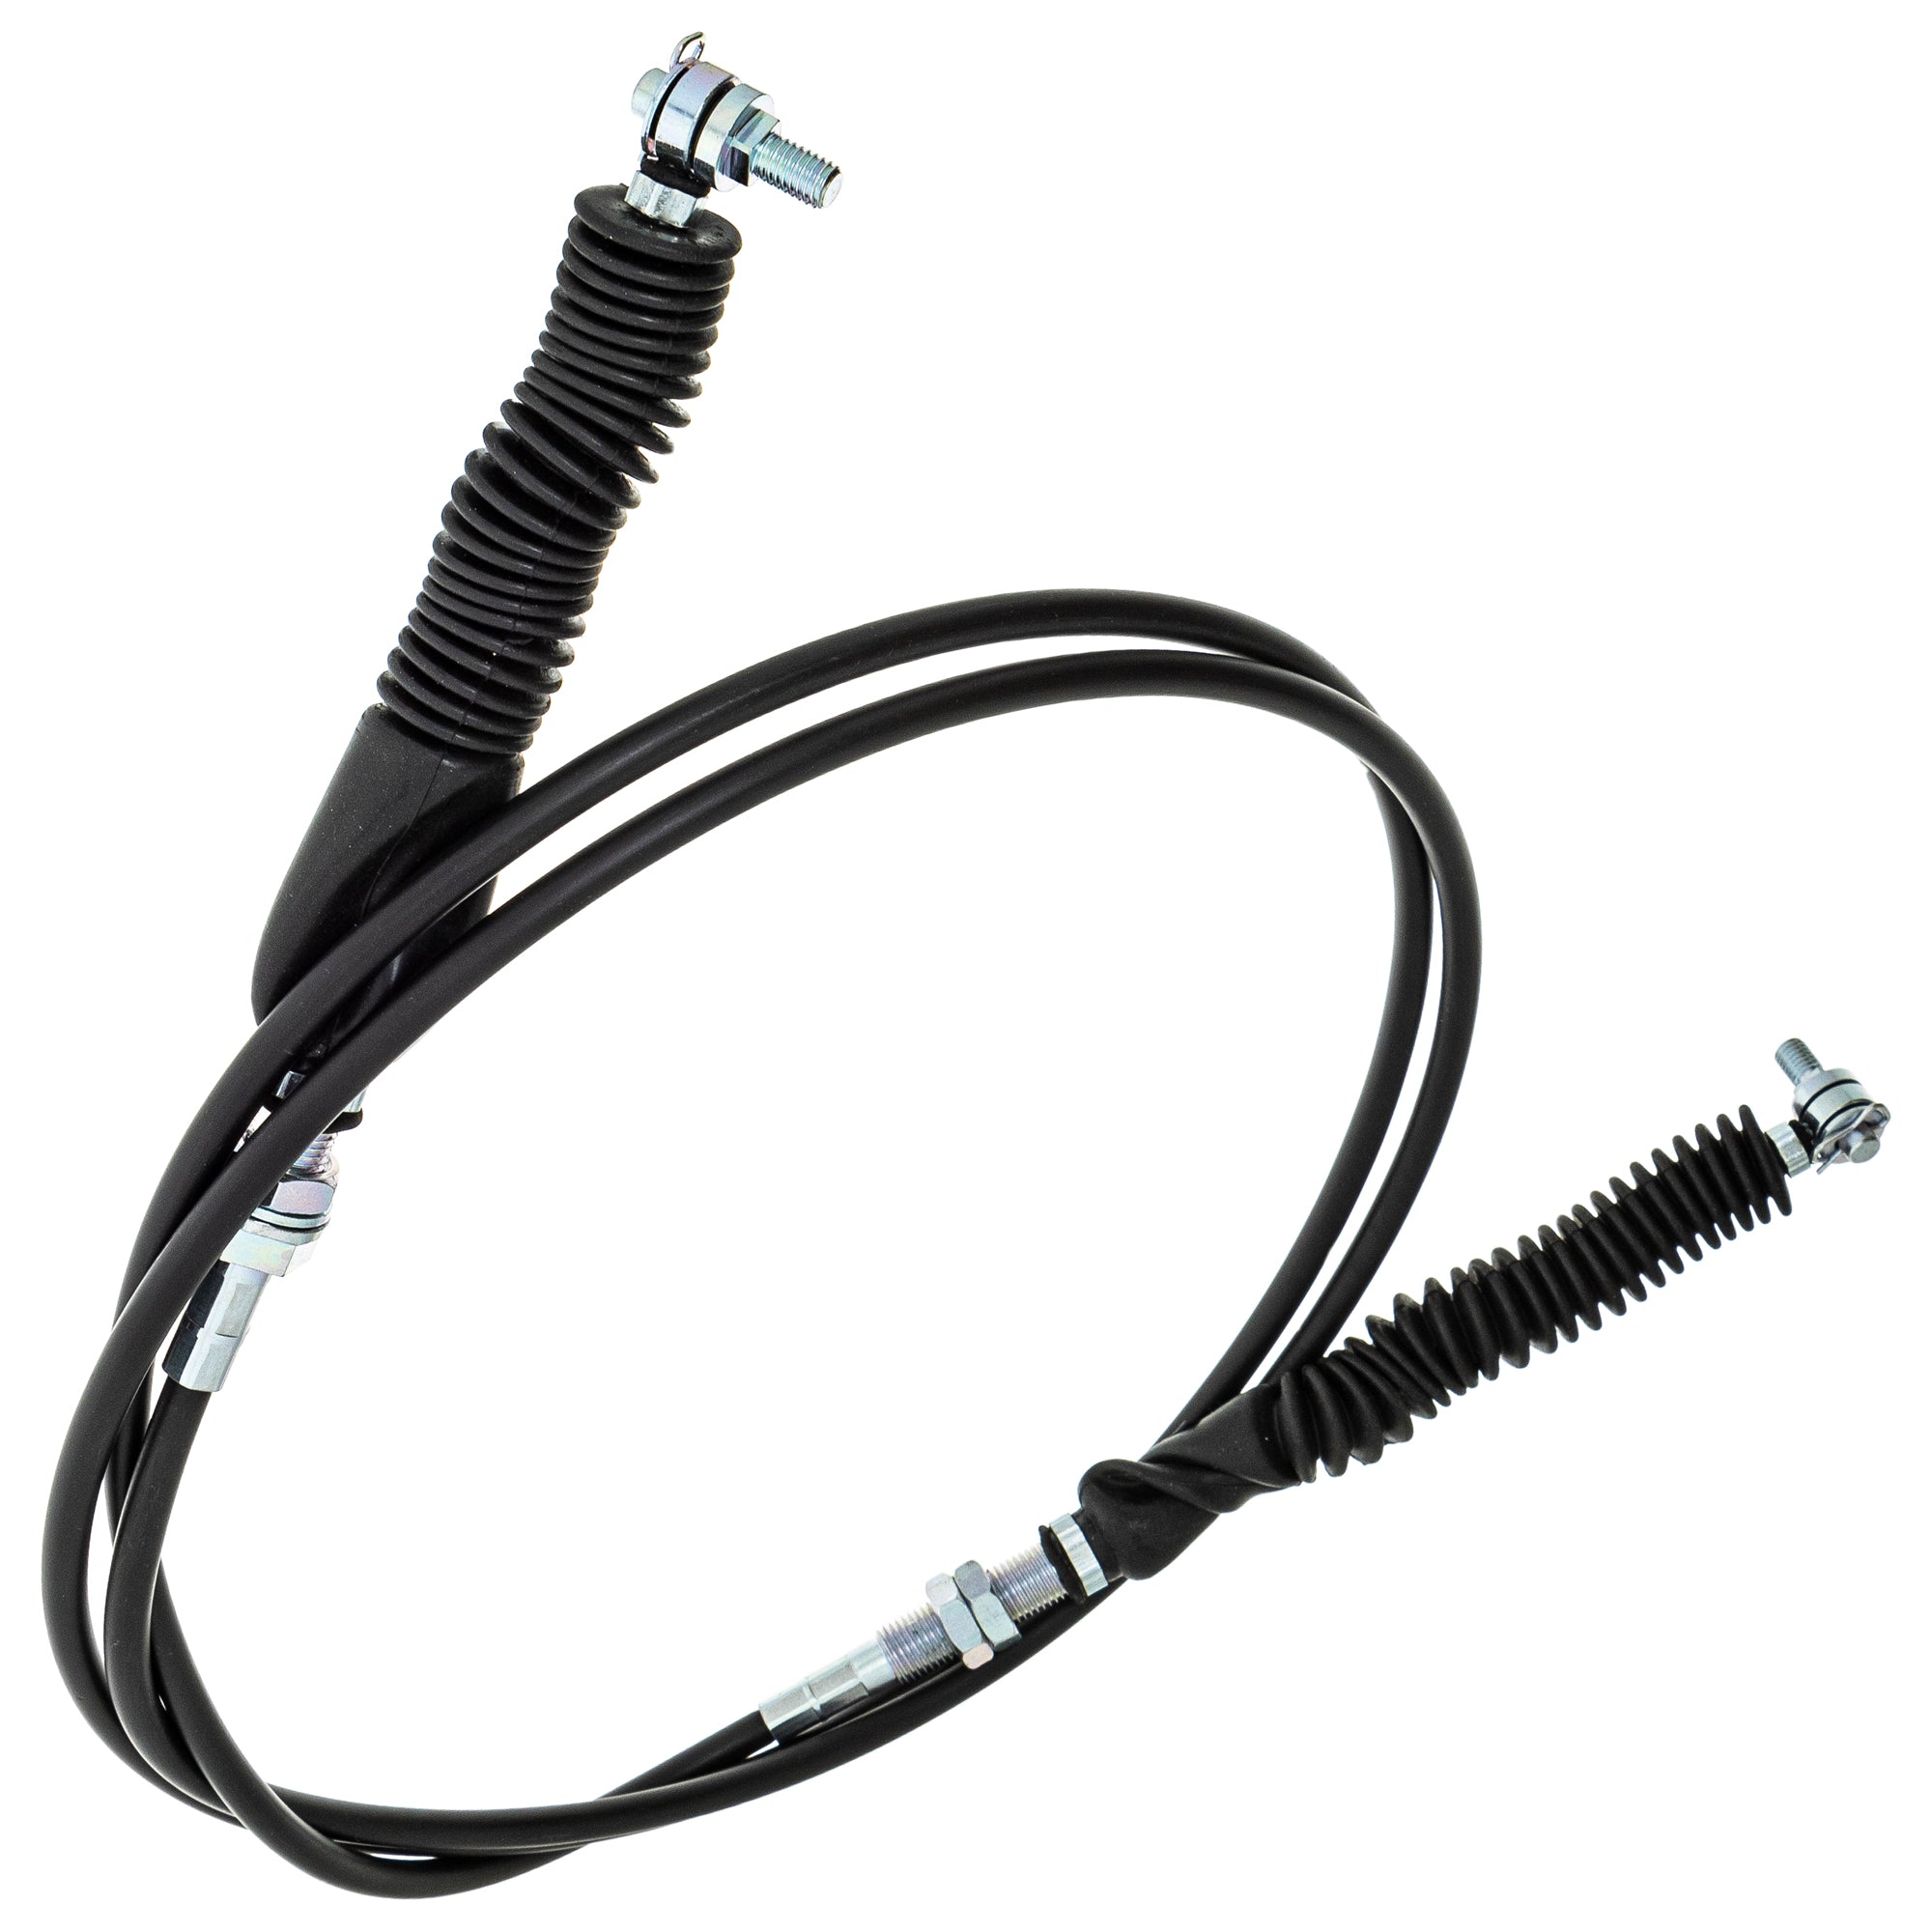 Shifter Cable For Polaris 7082474 7081883 7081651